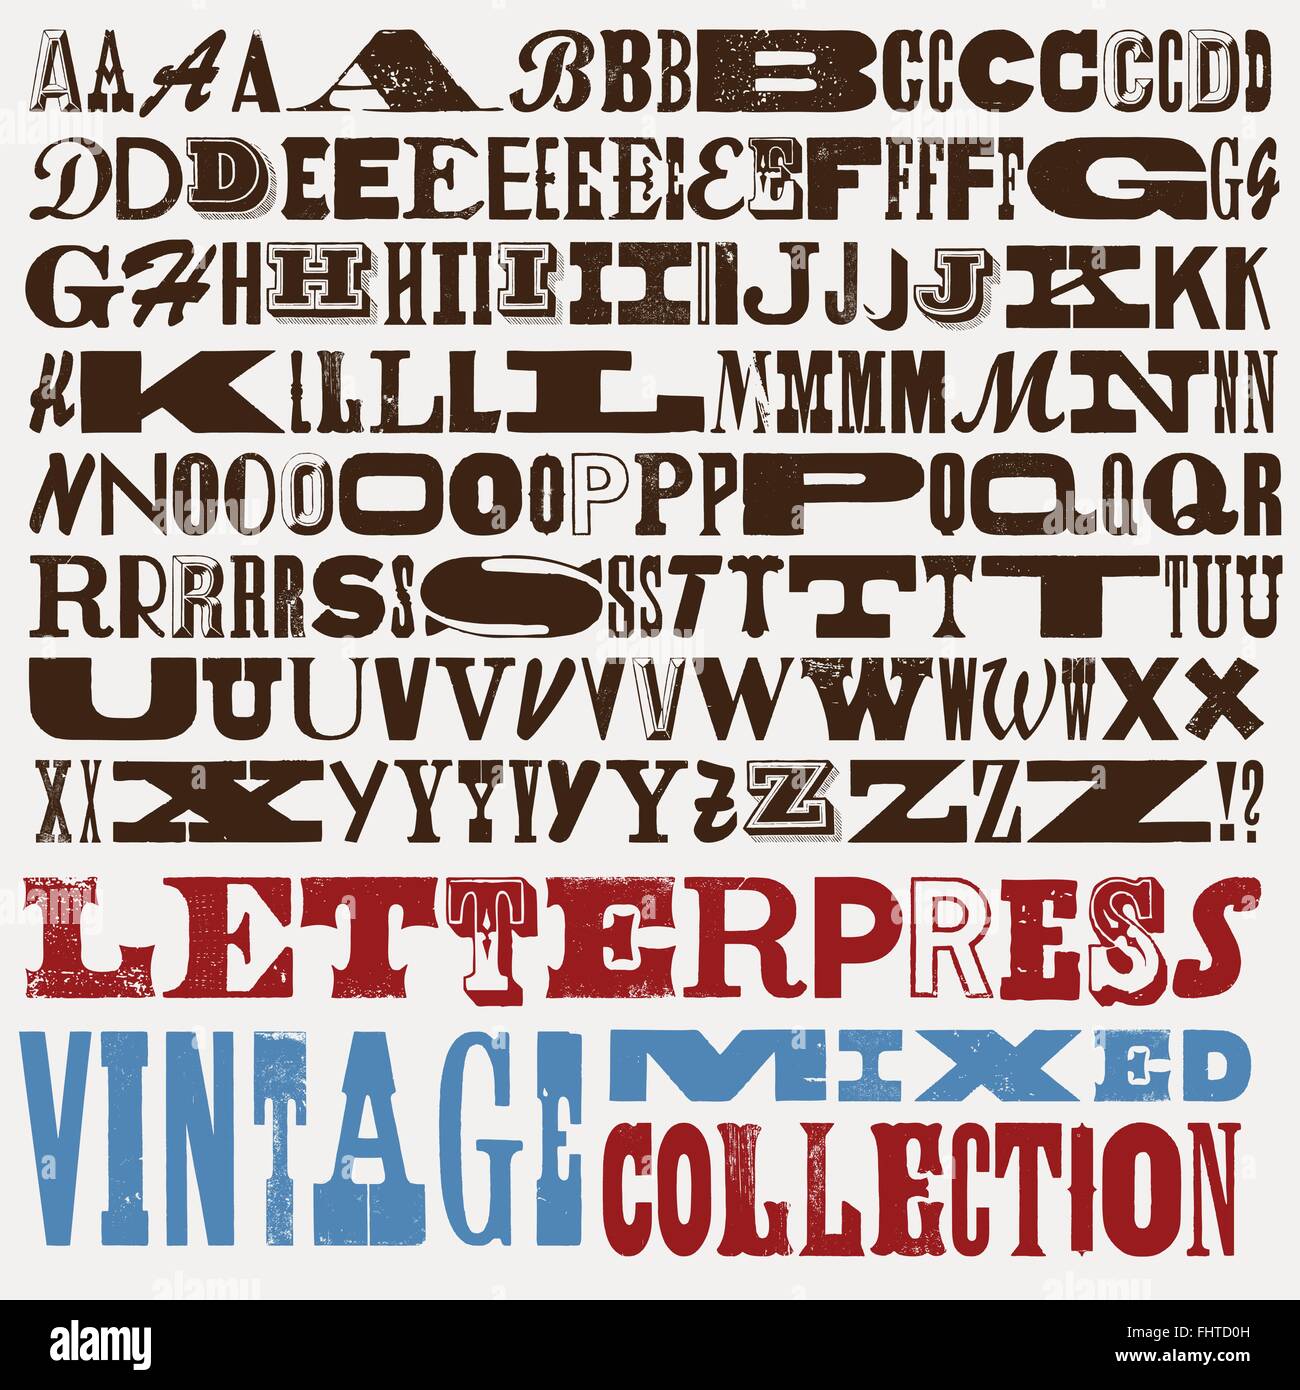 big mixed vintage letterpress collection Stock Vector